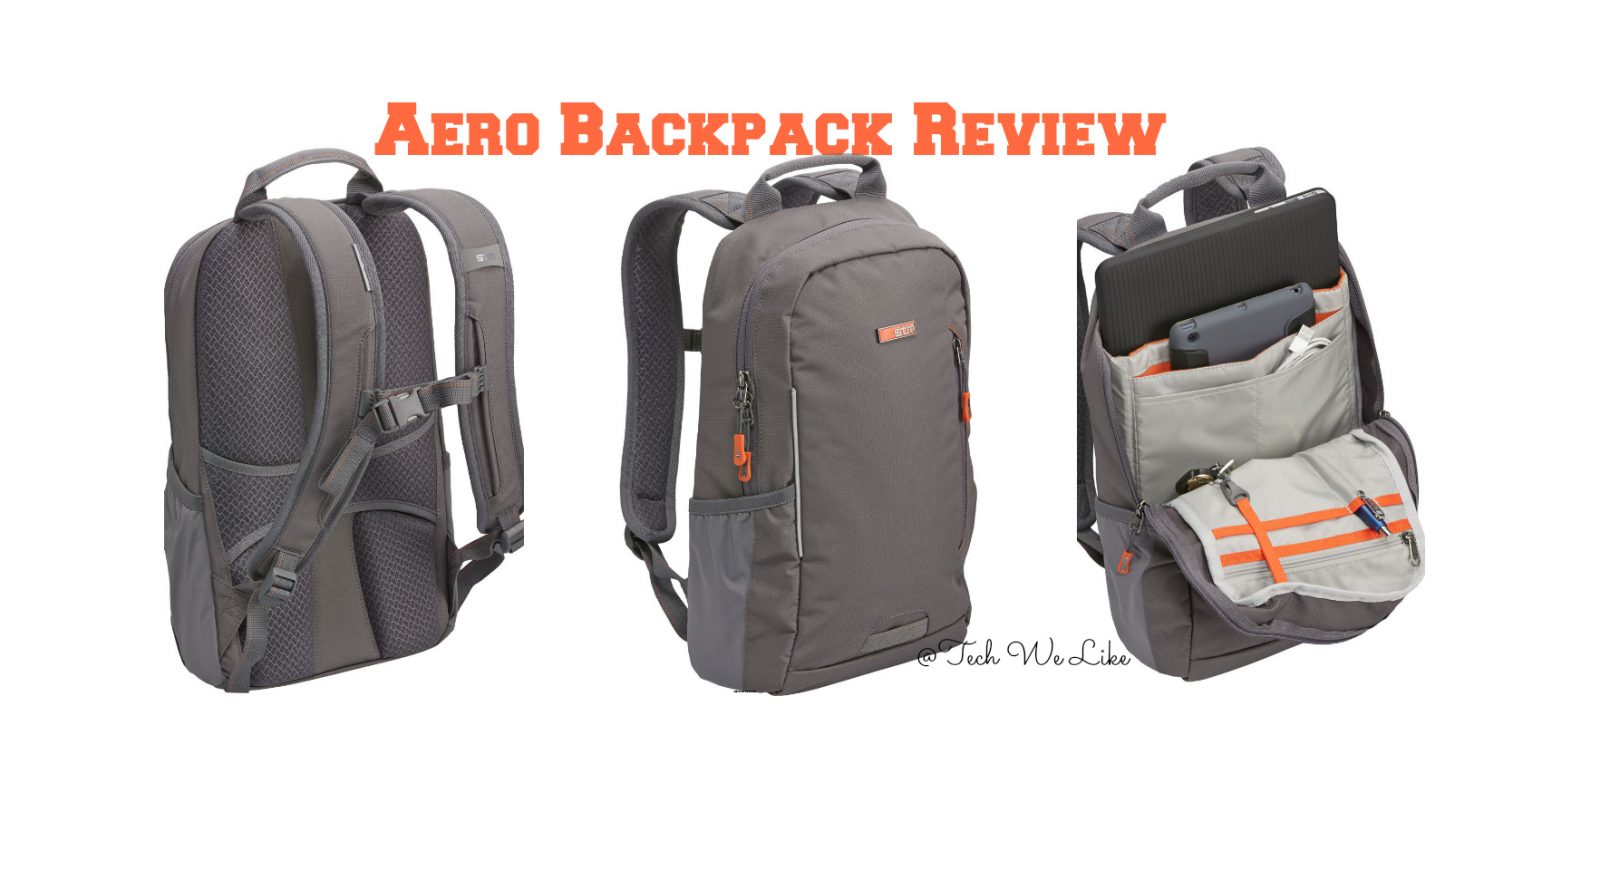 Aero Backpack Review - STM Bags